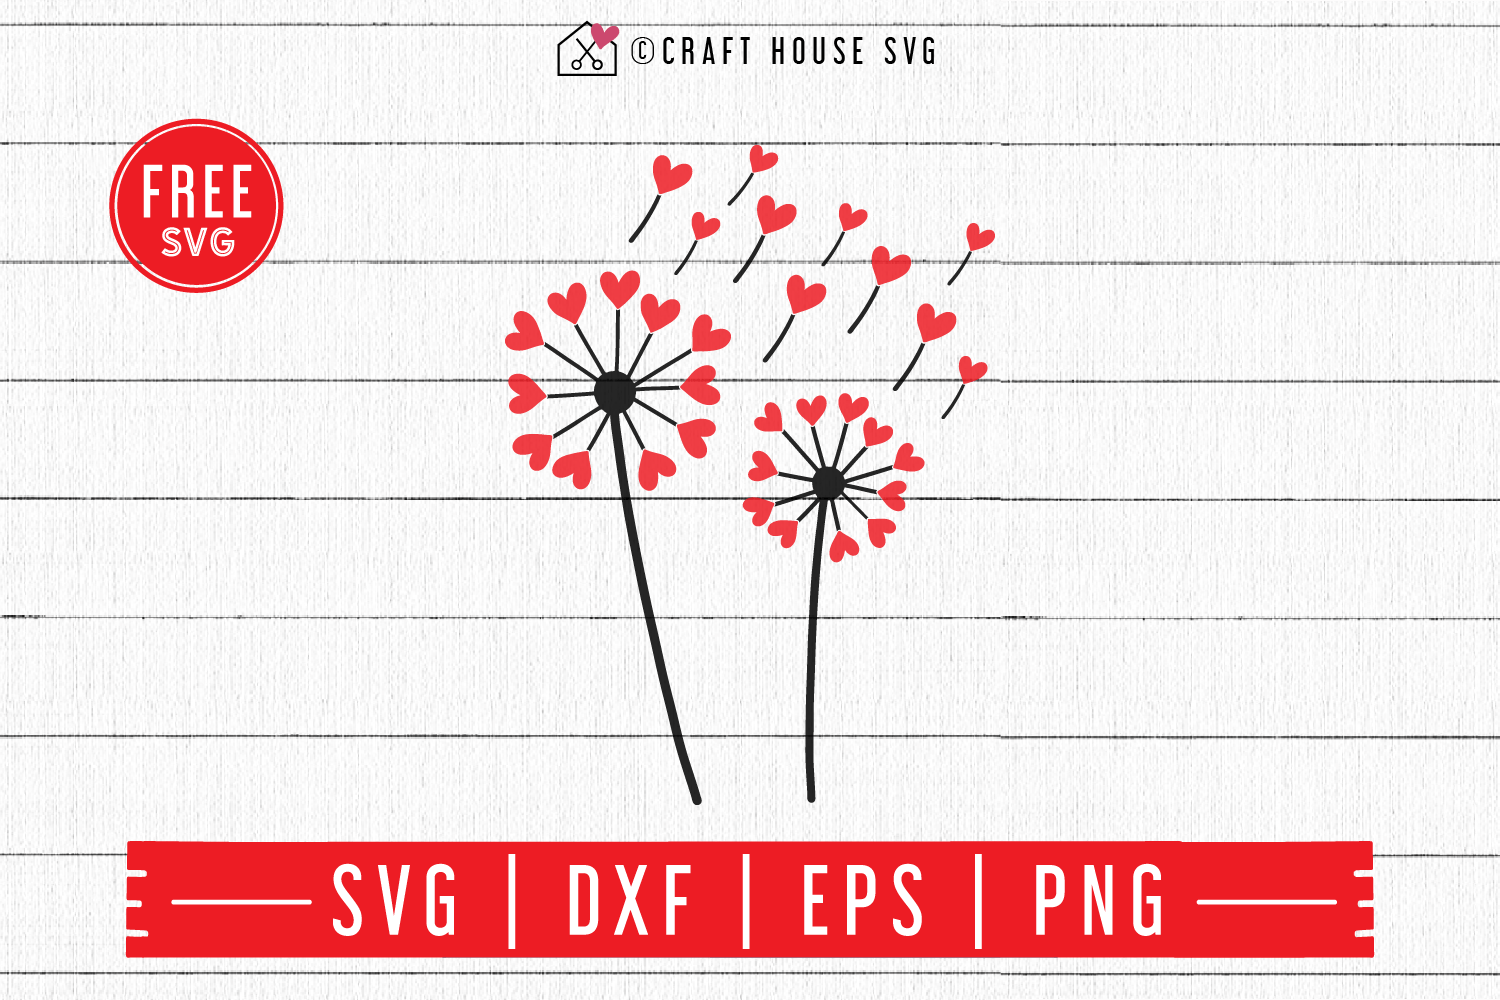 FREE Heart Dandelion SVG | FB83 Craft House SVG - SVG files for Cricut and Silhouette